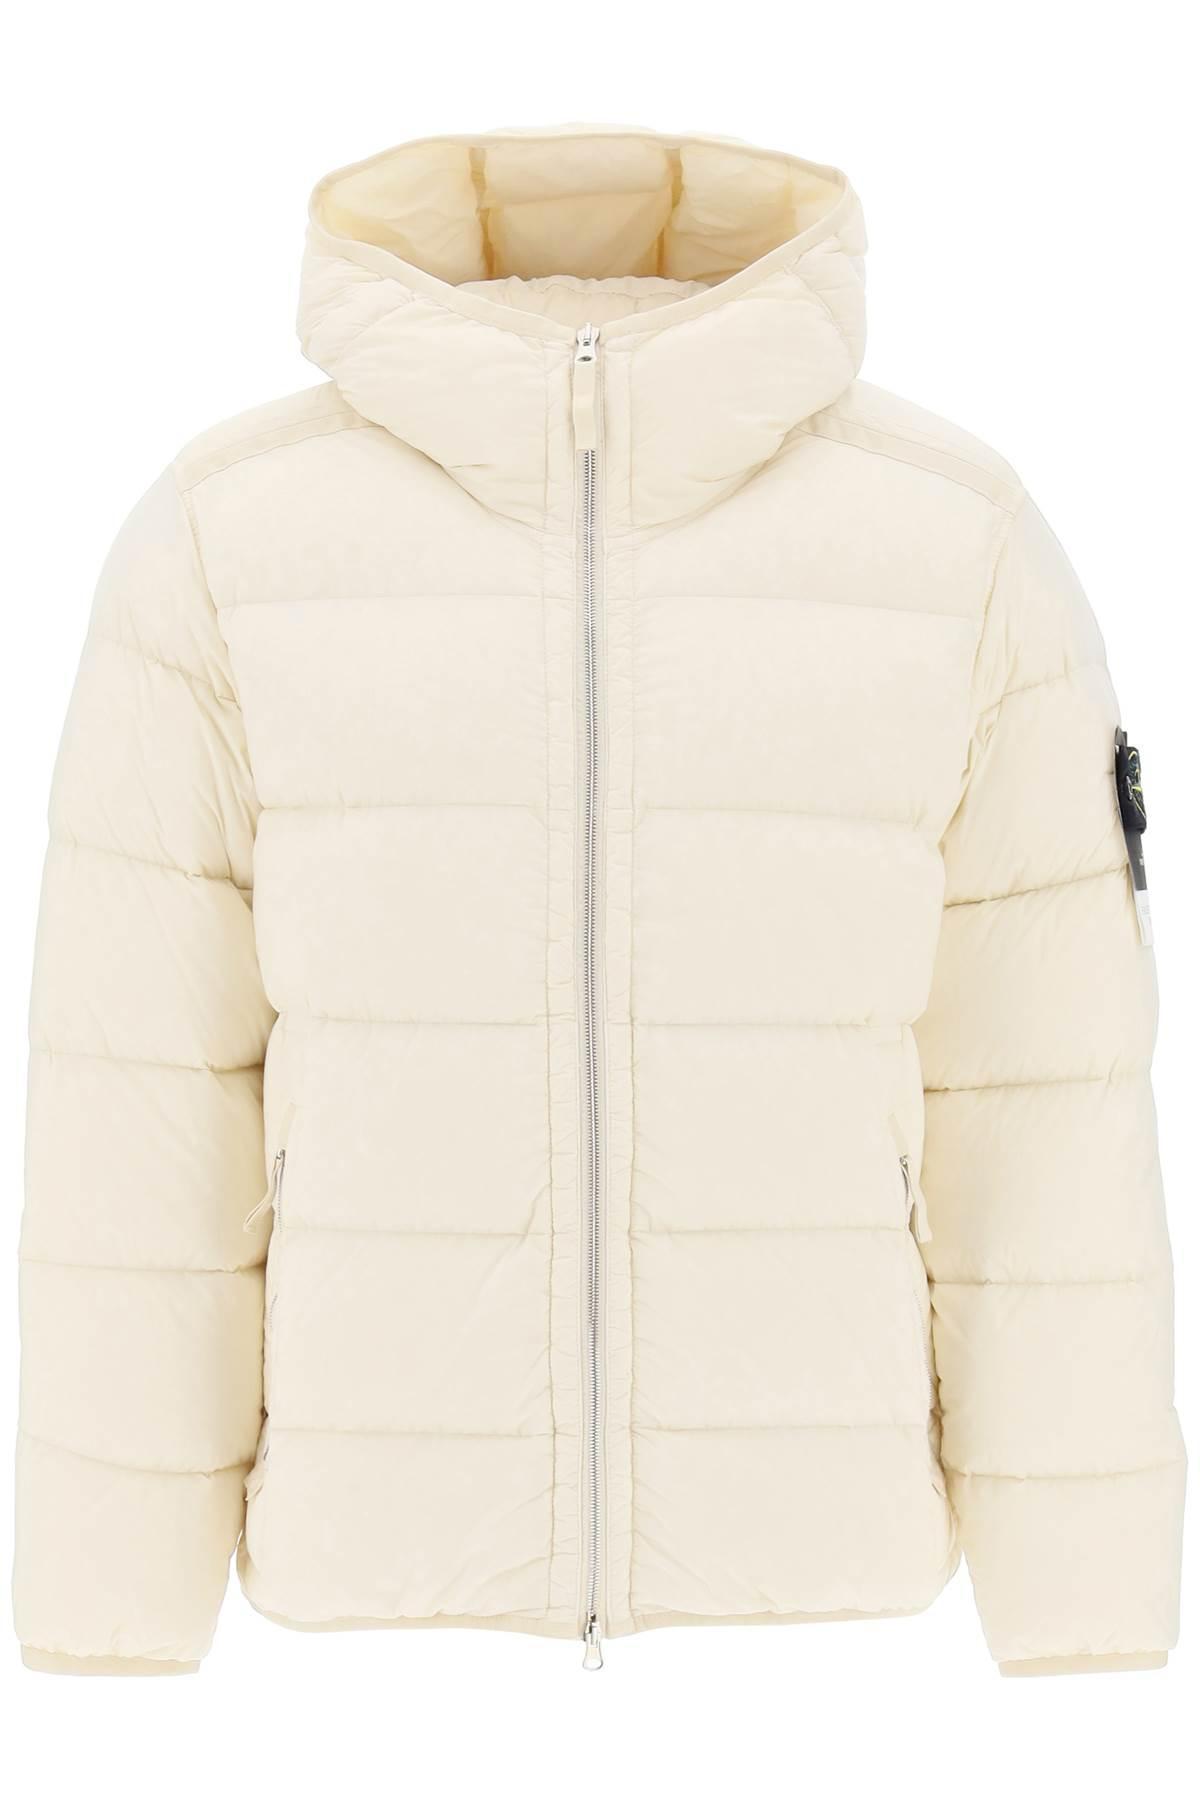 Stone Island Hooded Puffer Jacket In Seamless Tunnel Nylon in Natural ...